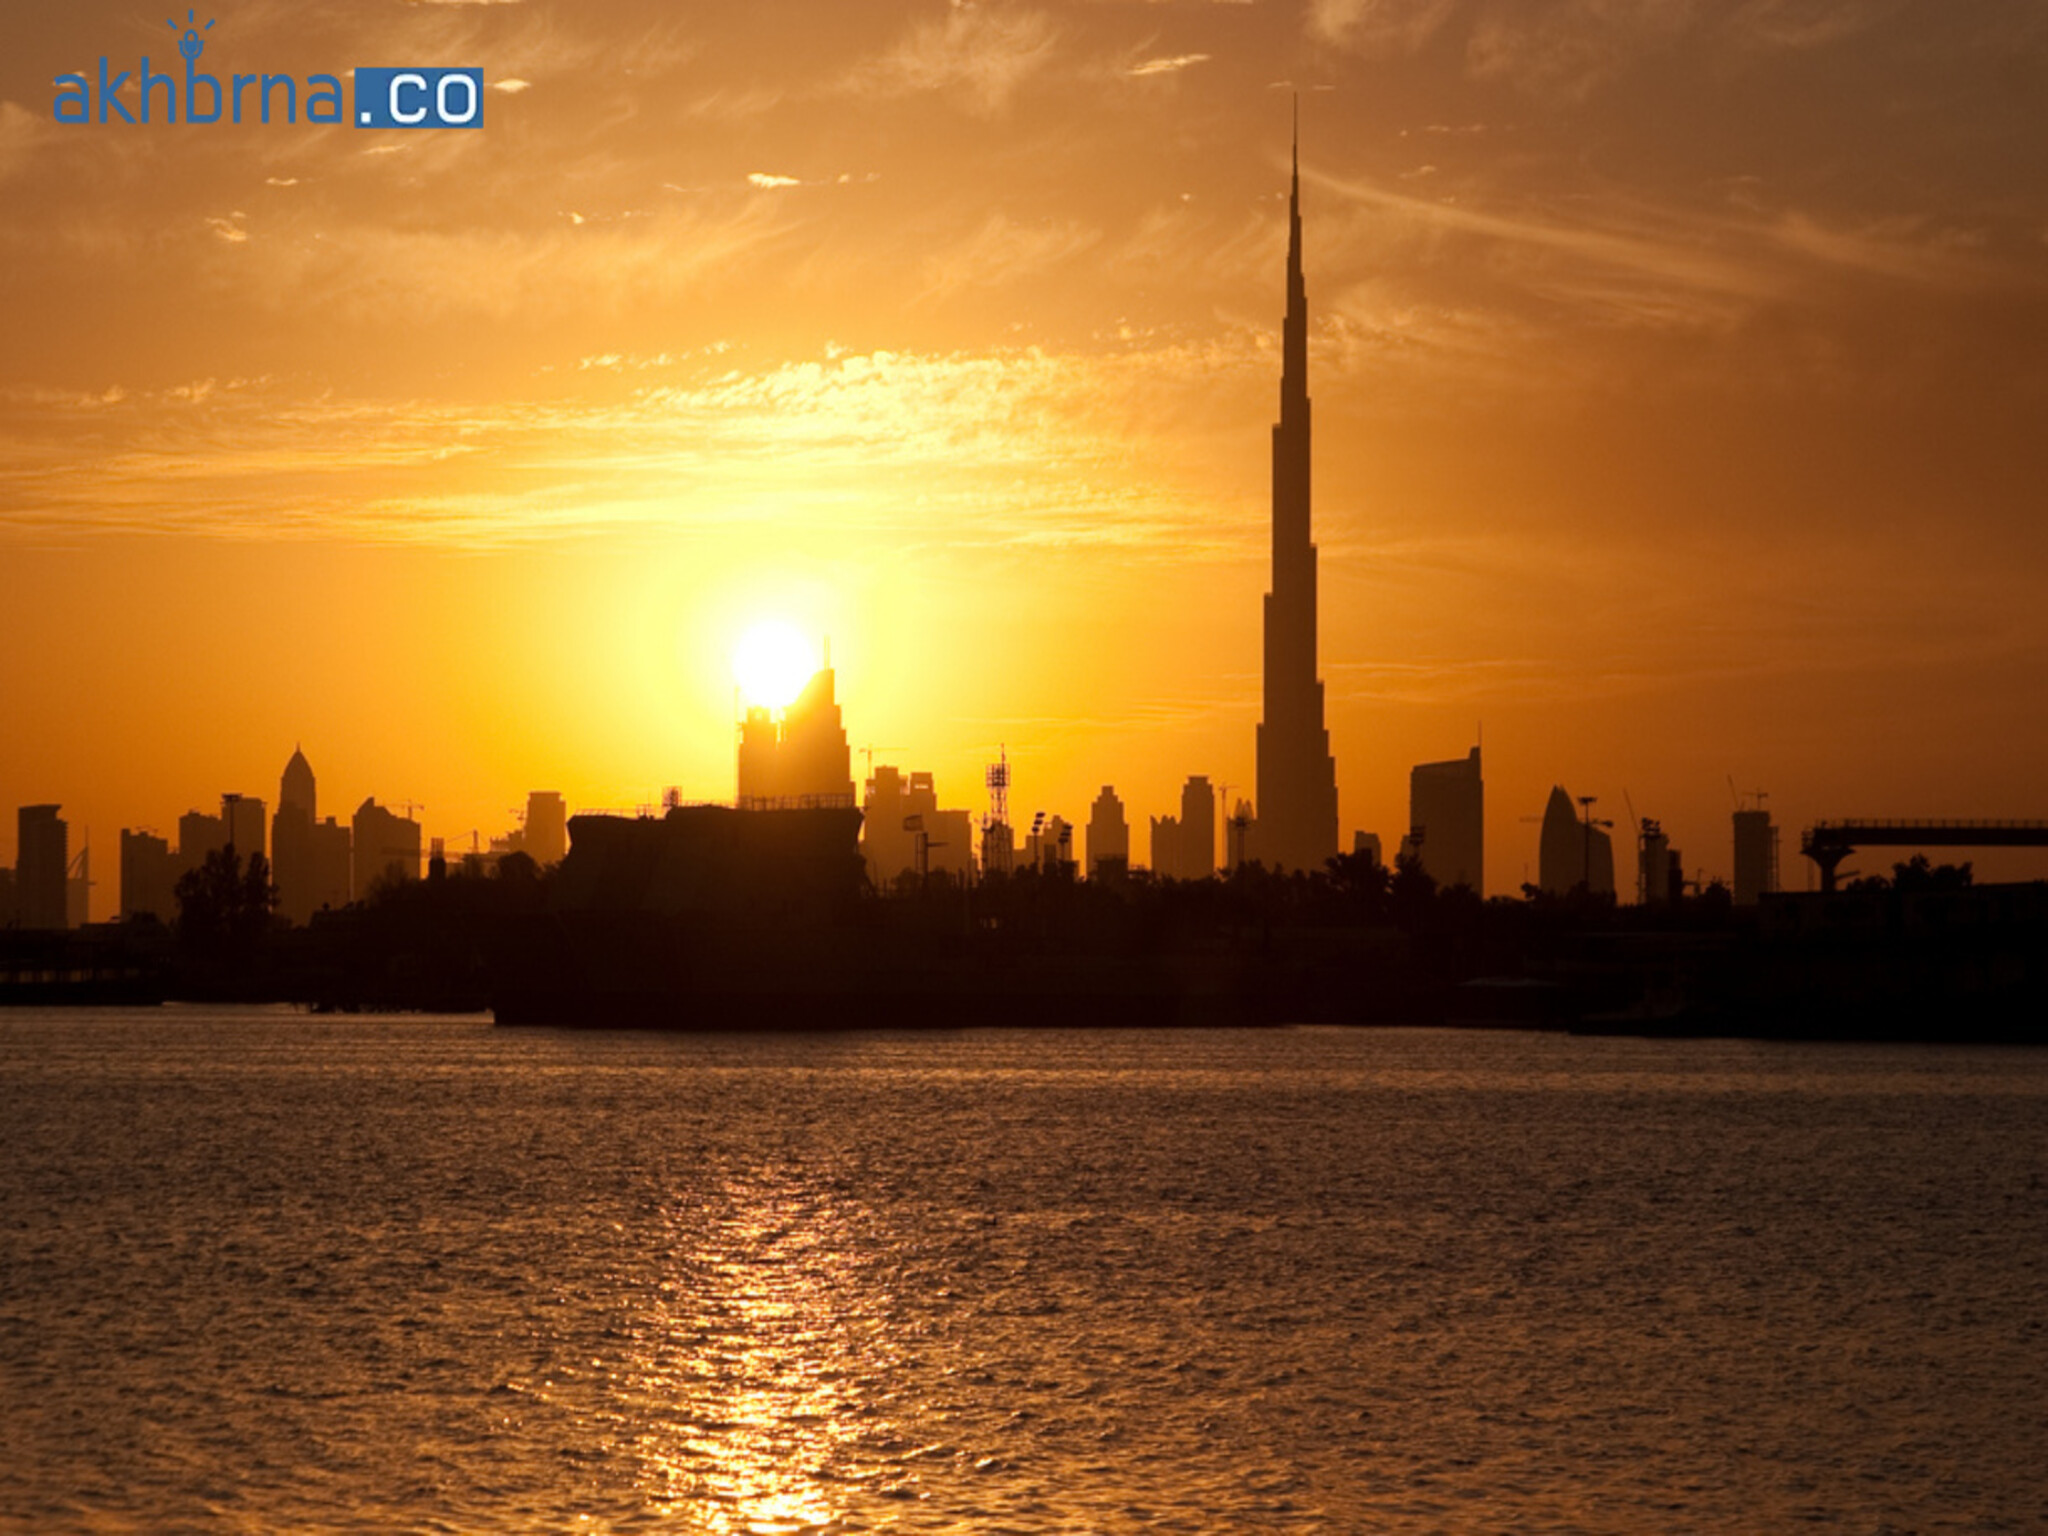 UAE: Summer longest day in June to extend nearly 14 hours